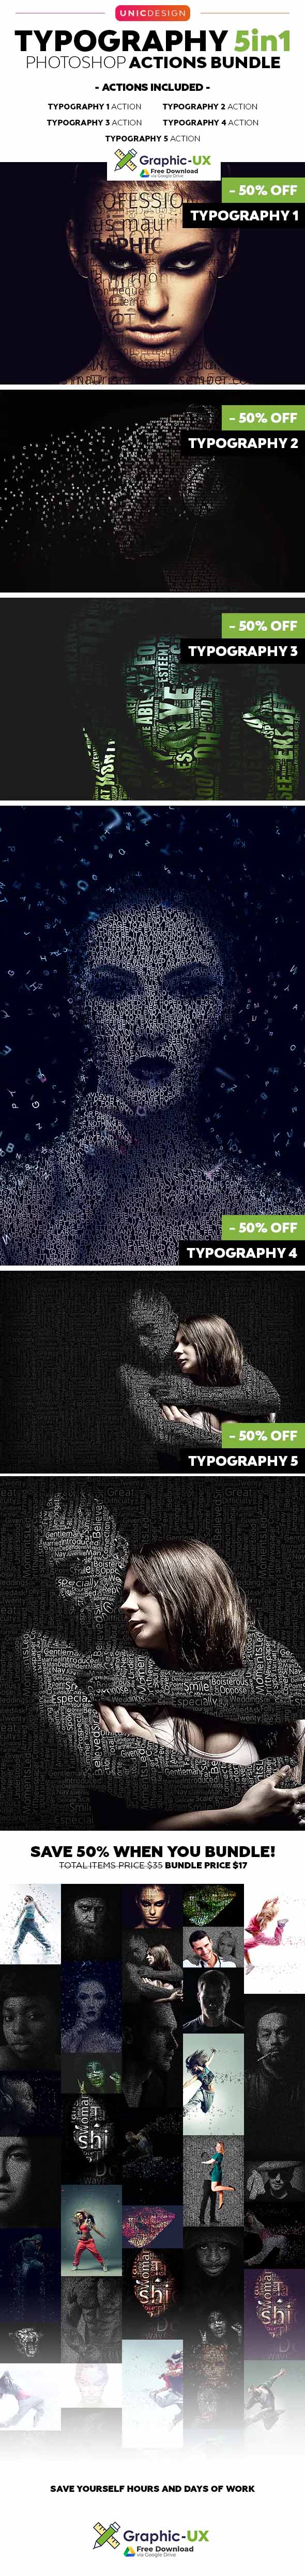 Typography 5in1 Photoshop Actions Bundle 